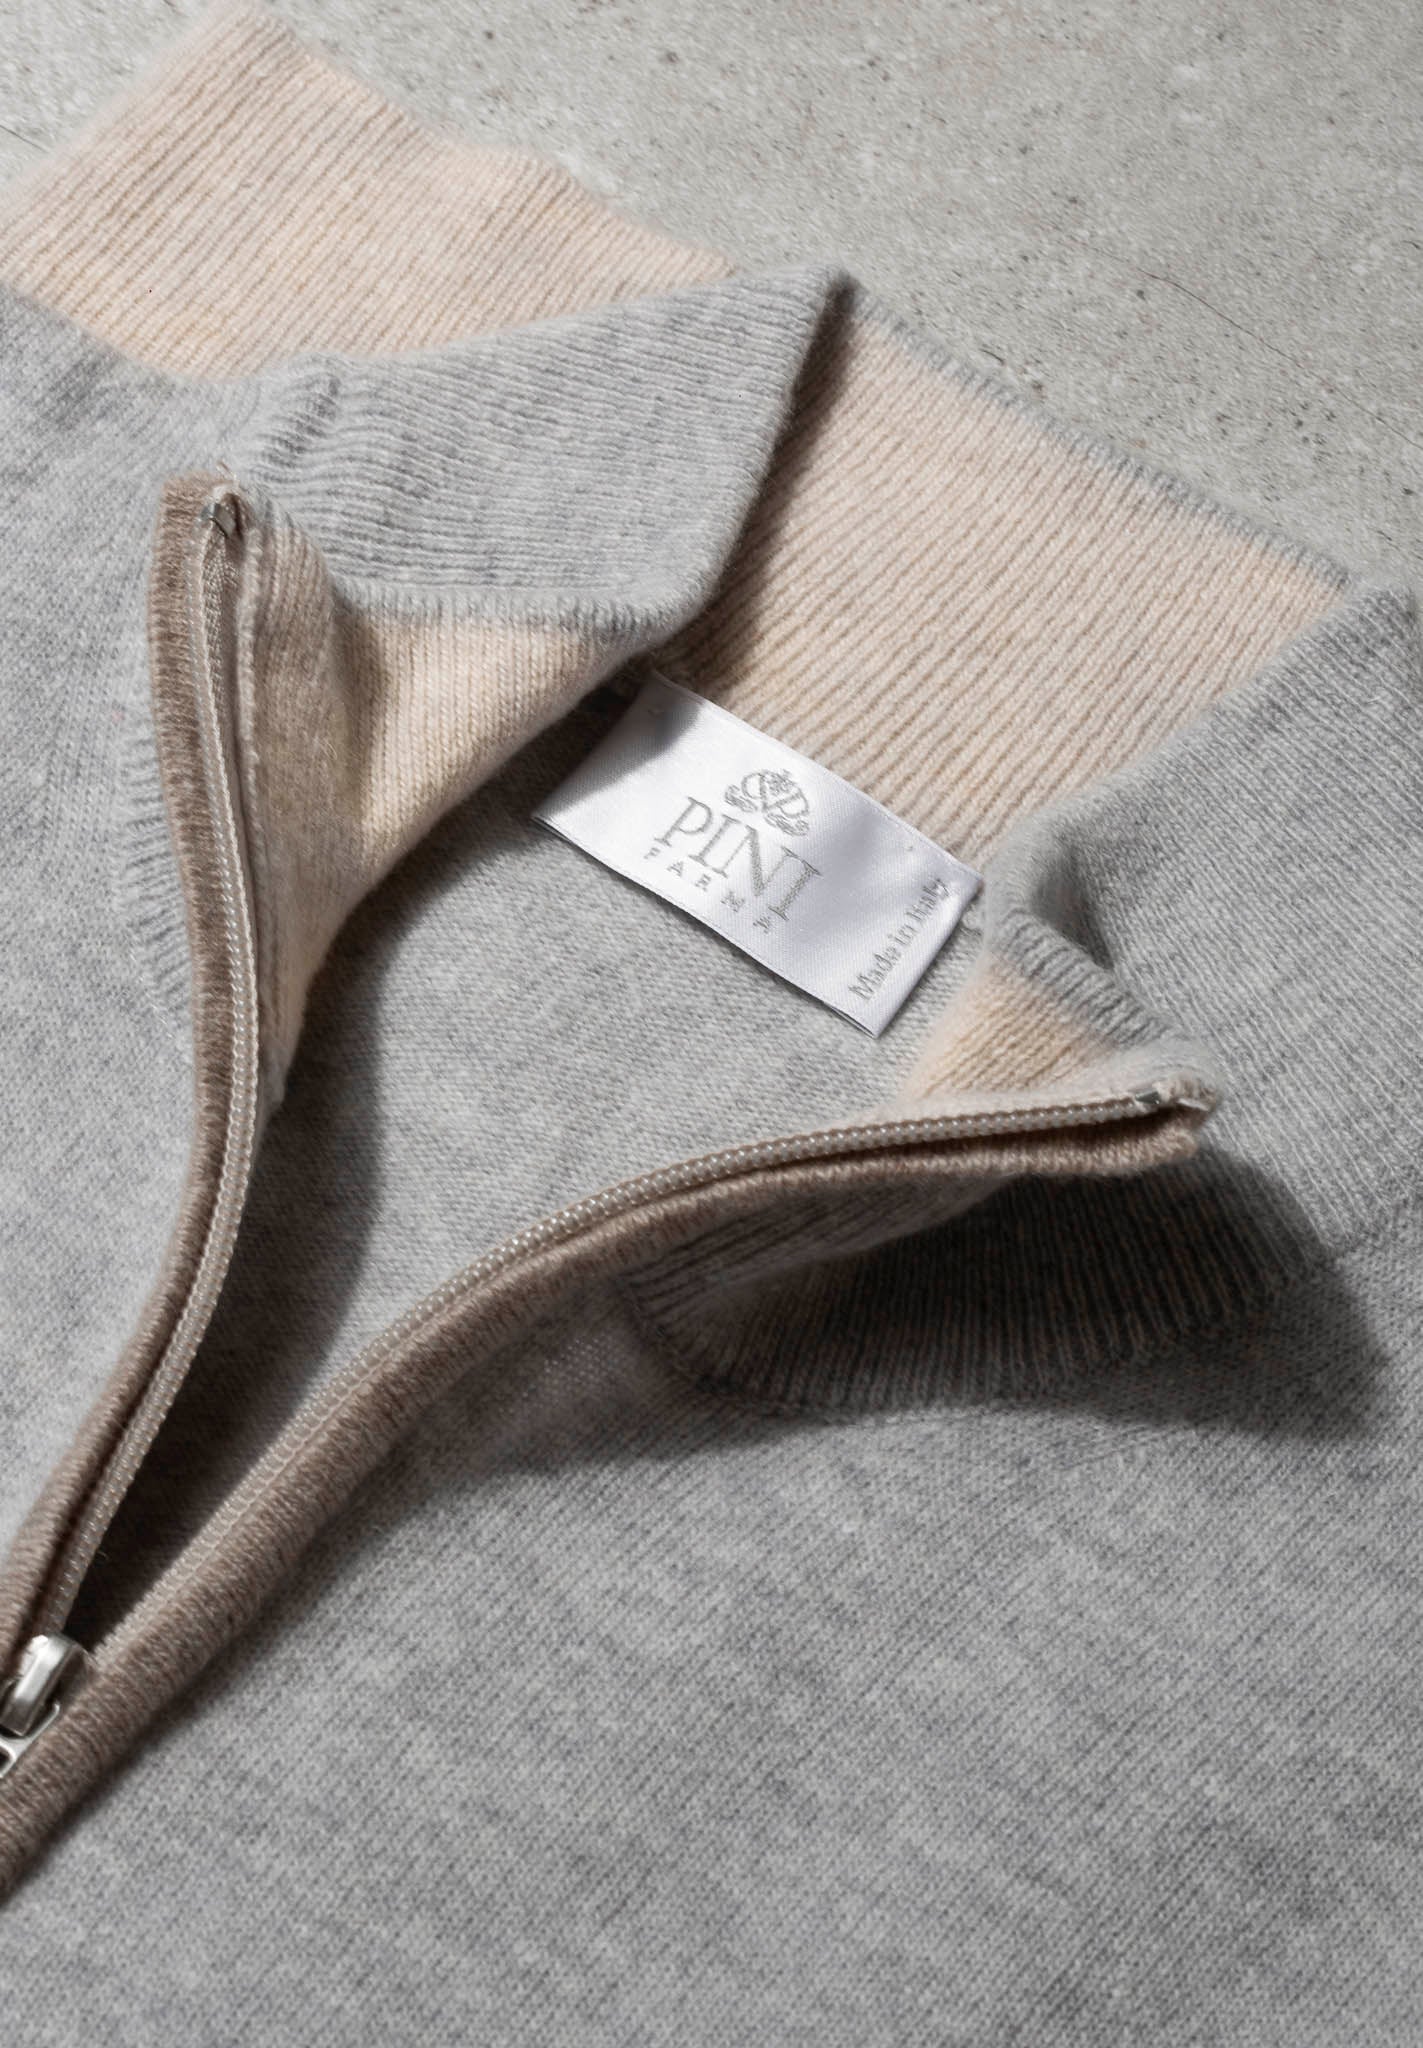 Grey and beige full zip cardigan | Made in Italy | Pini Parma